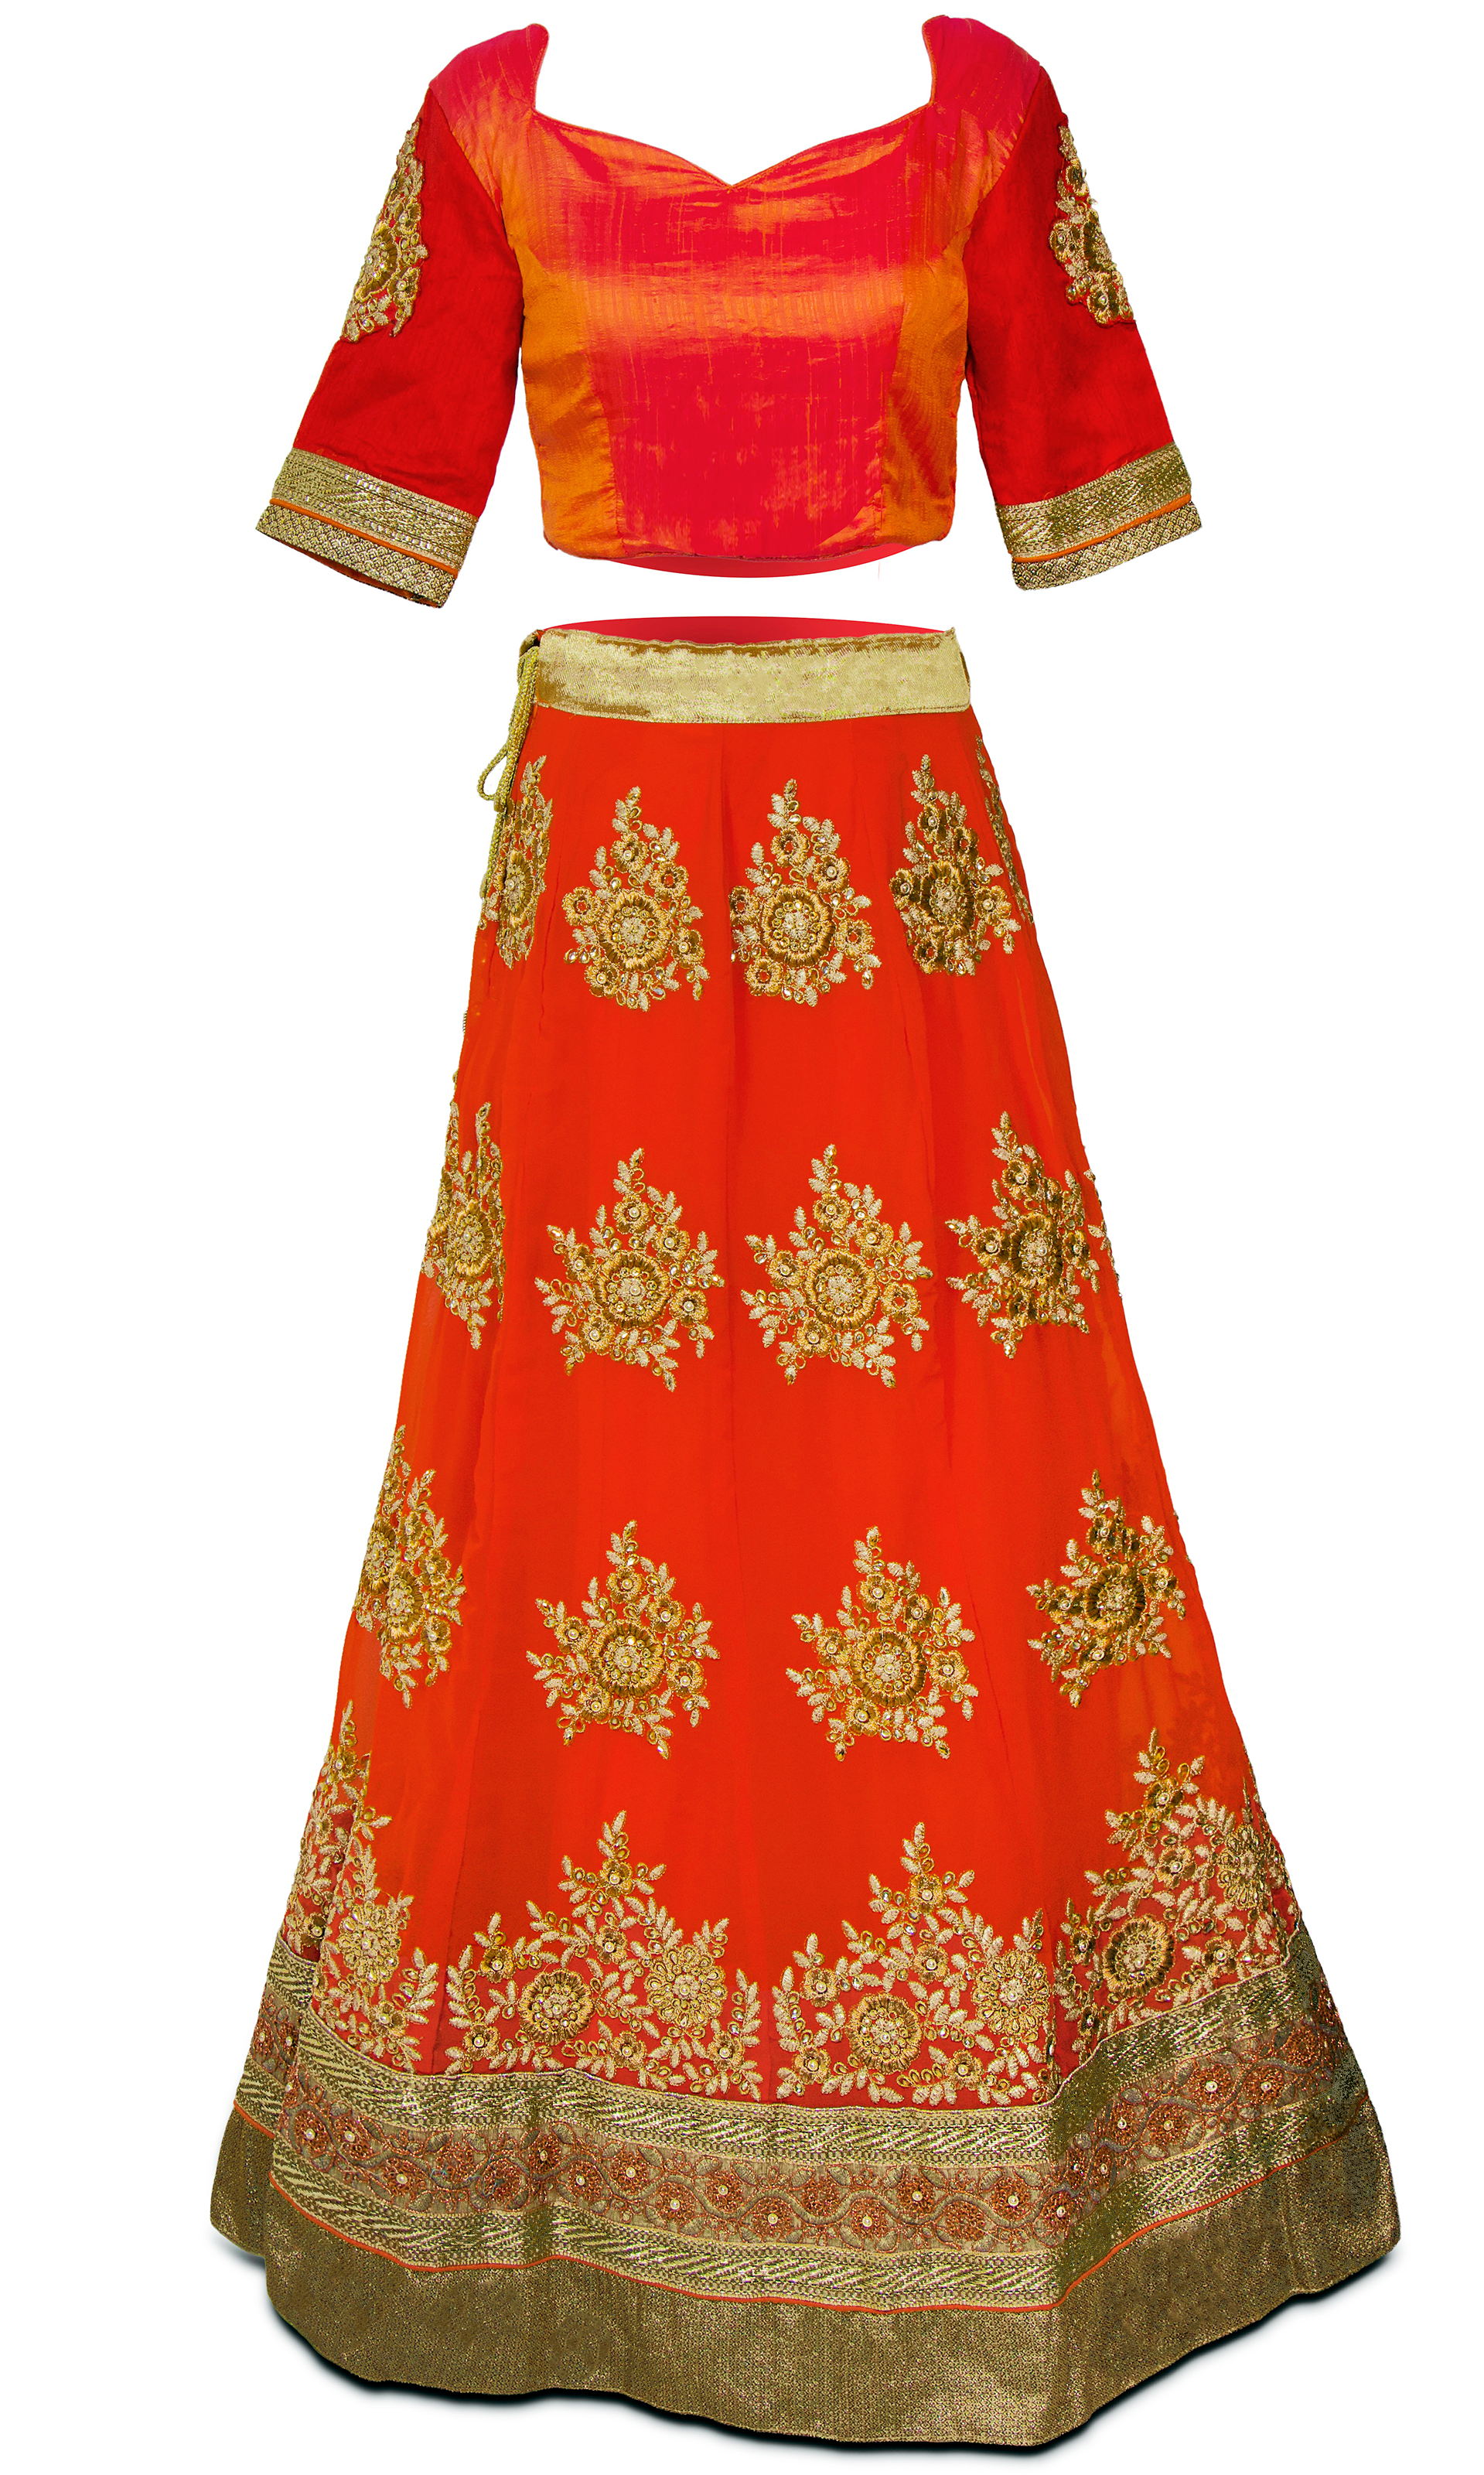 3-piece orange/red shiny silk Lehenga with gold embroidery & mid-sleeve blouse and a matching dupatta.